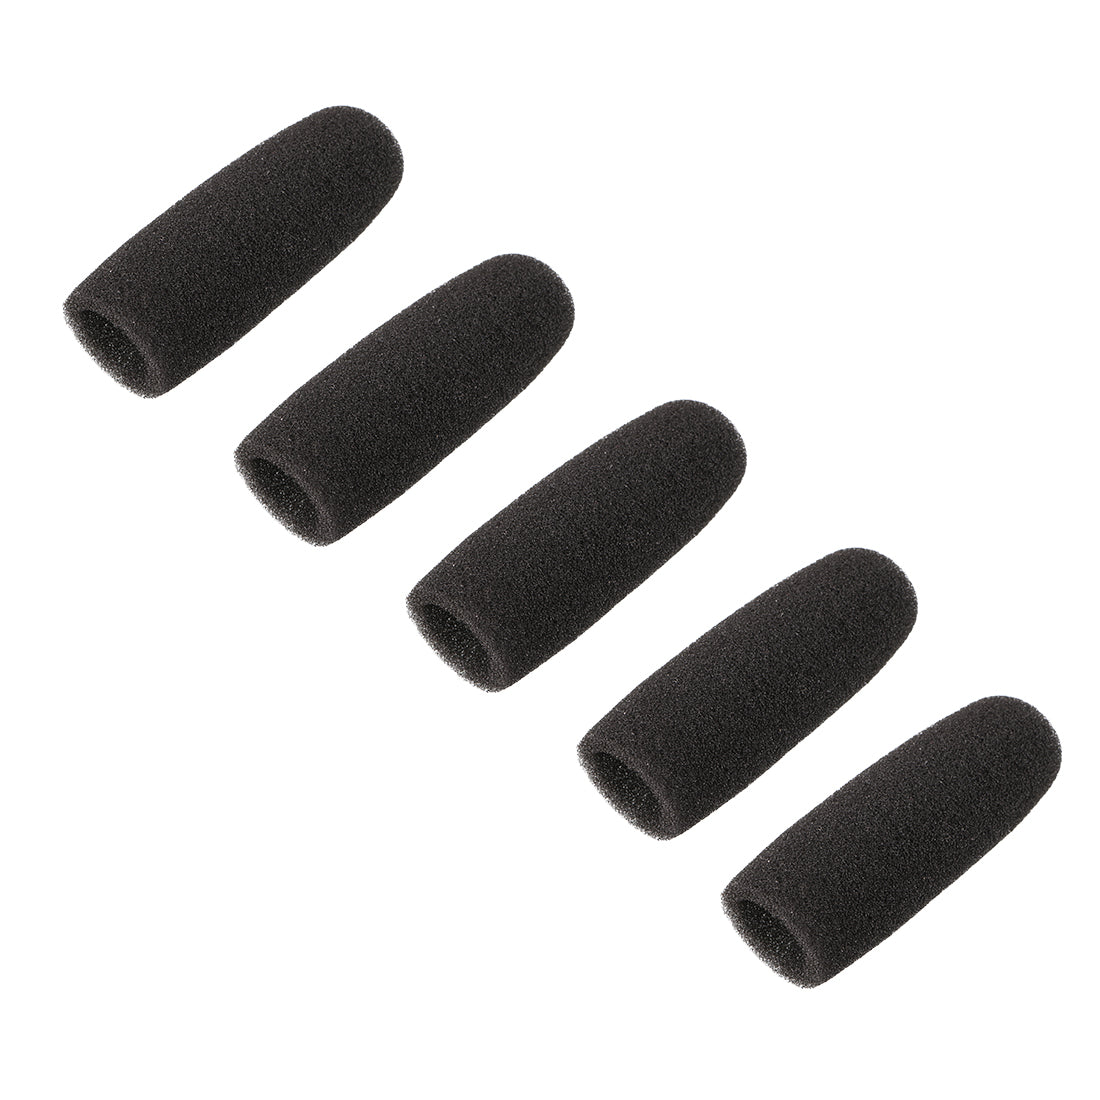 uxcell Uxcell 5PCS Sponge Foam Mic Cover Conference Microphone Windscreen Shield Protection Black 72mm Long